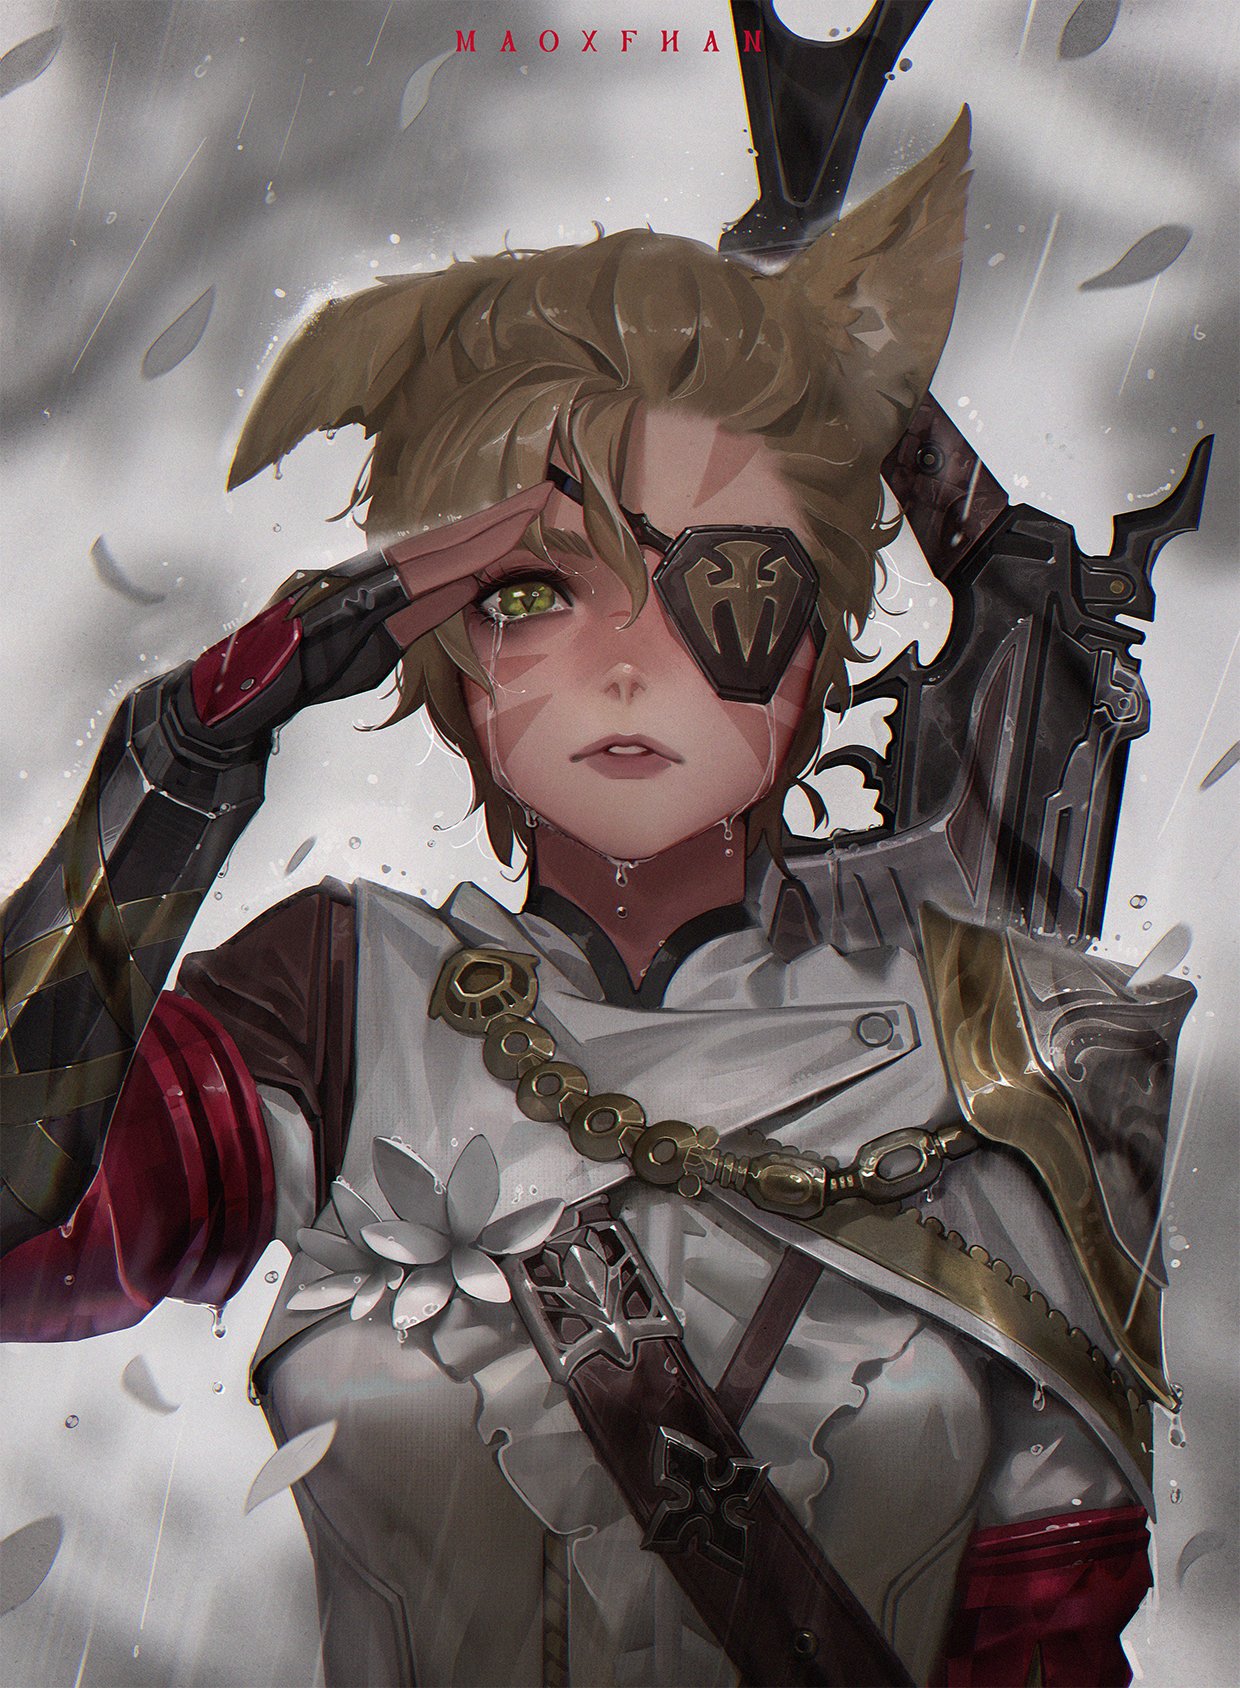 1girl animal_ears armor avatar_(ff14) bangs brown_hair cat_ears crying crying_with_eyes_open eyepatch facial_mark final_fantasy final_fantasy_xiv fingerless_gloves gloves green_eyes gun highres machinist_(final_fantasy) maoxfhan parted_lips rain scar scar_on_face scar_on_nose short_hair shoulder_armor slit_pupils solo tears upper_body weapon whisker_markings